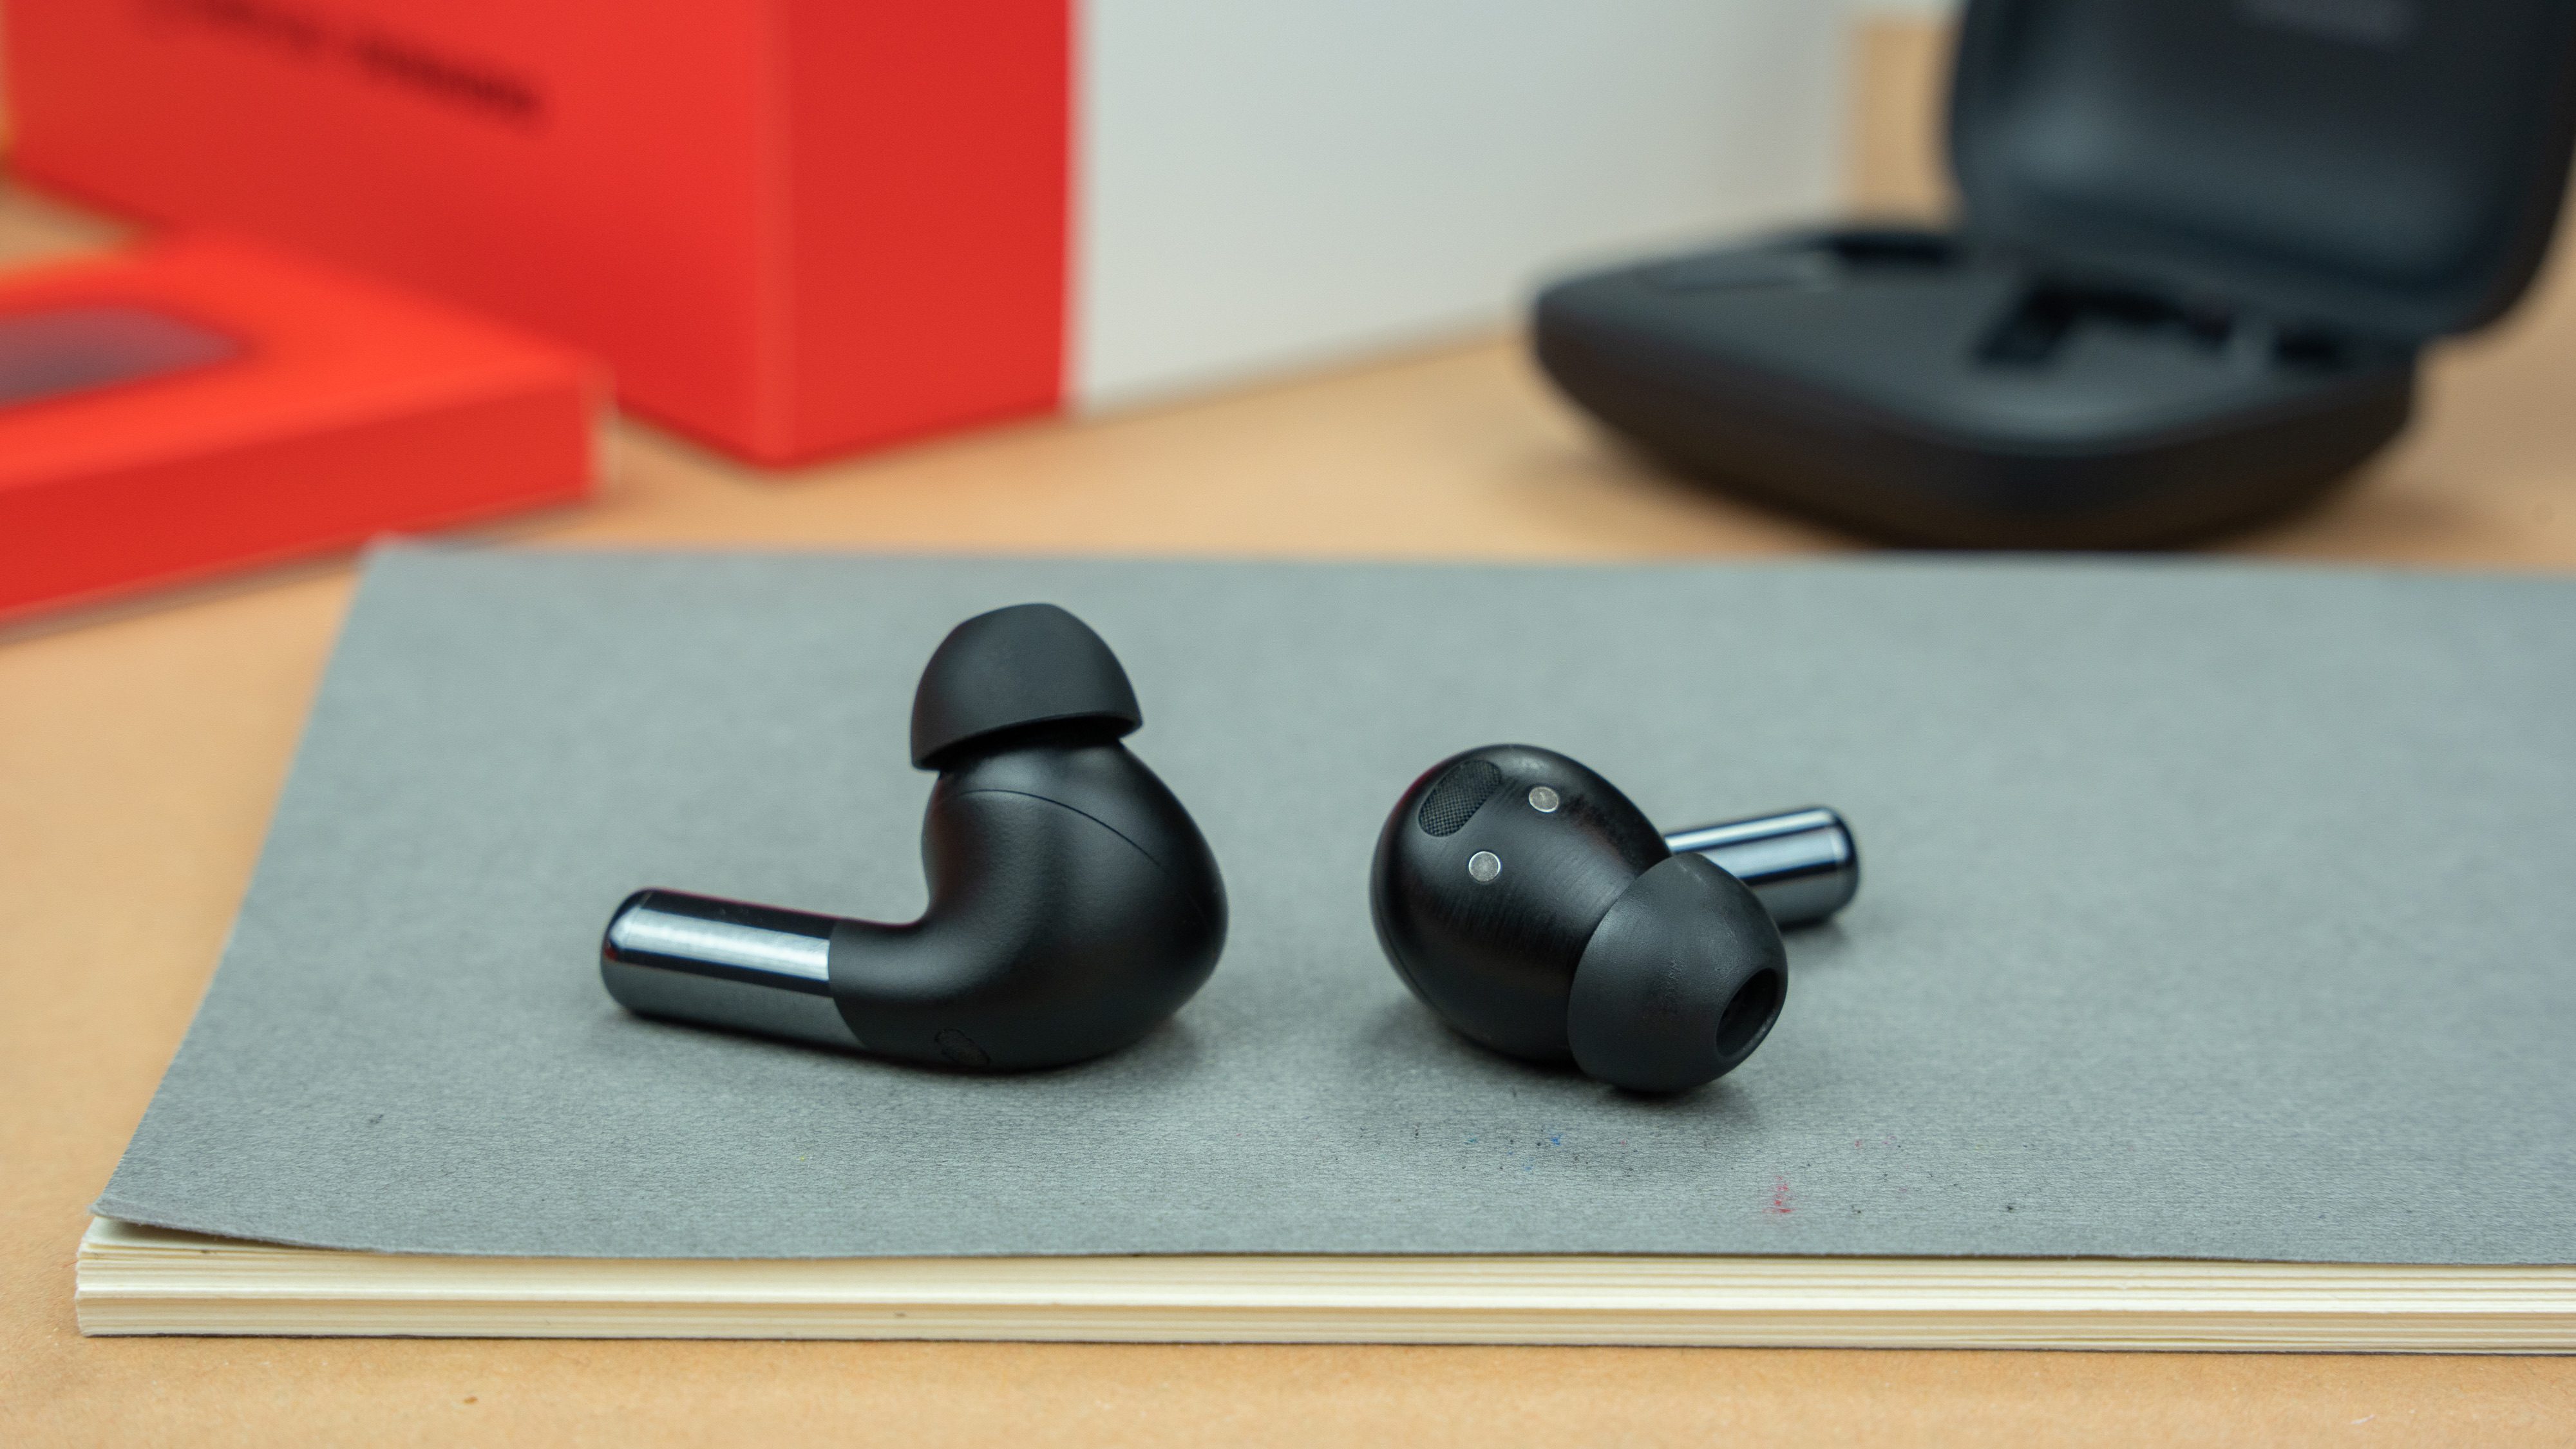 OnePlus Teases the Buds Pro 3 ANC In-Ears with 'Flagship Sound